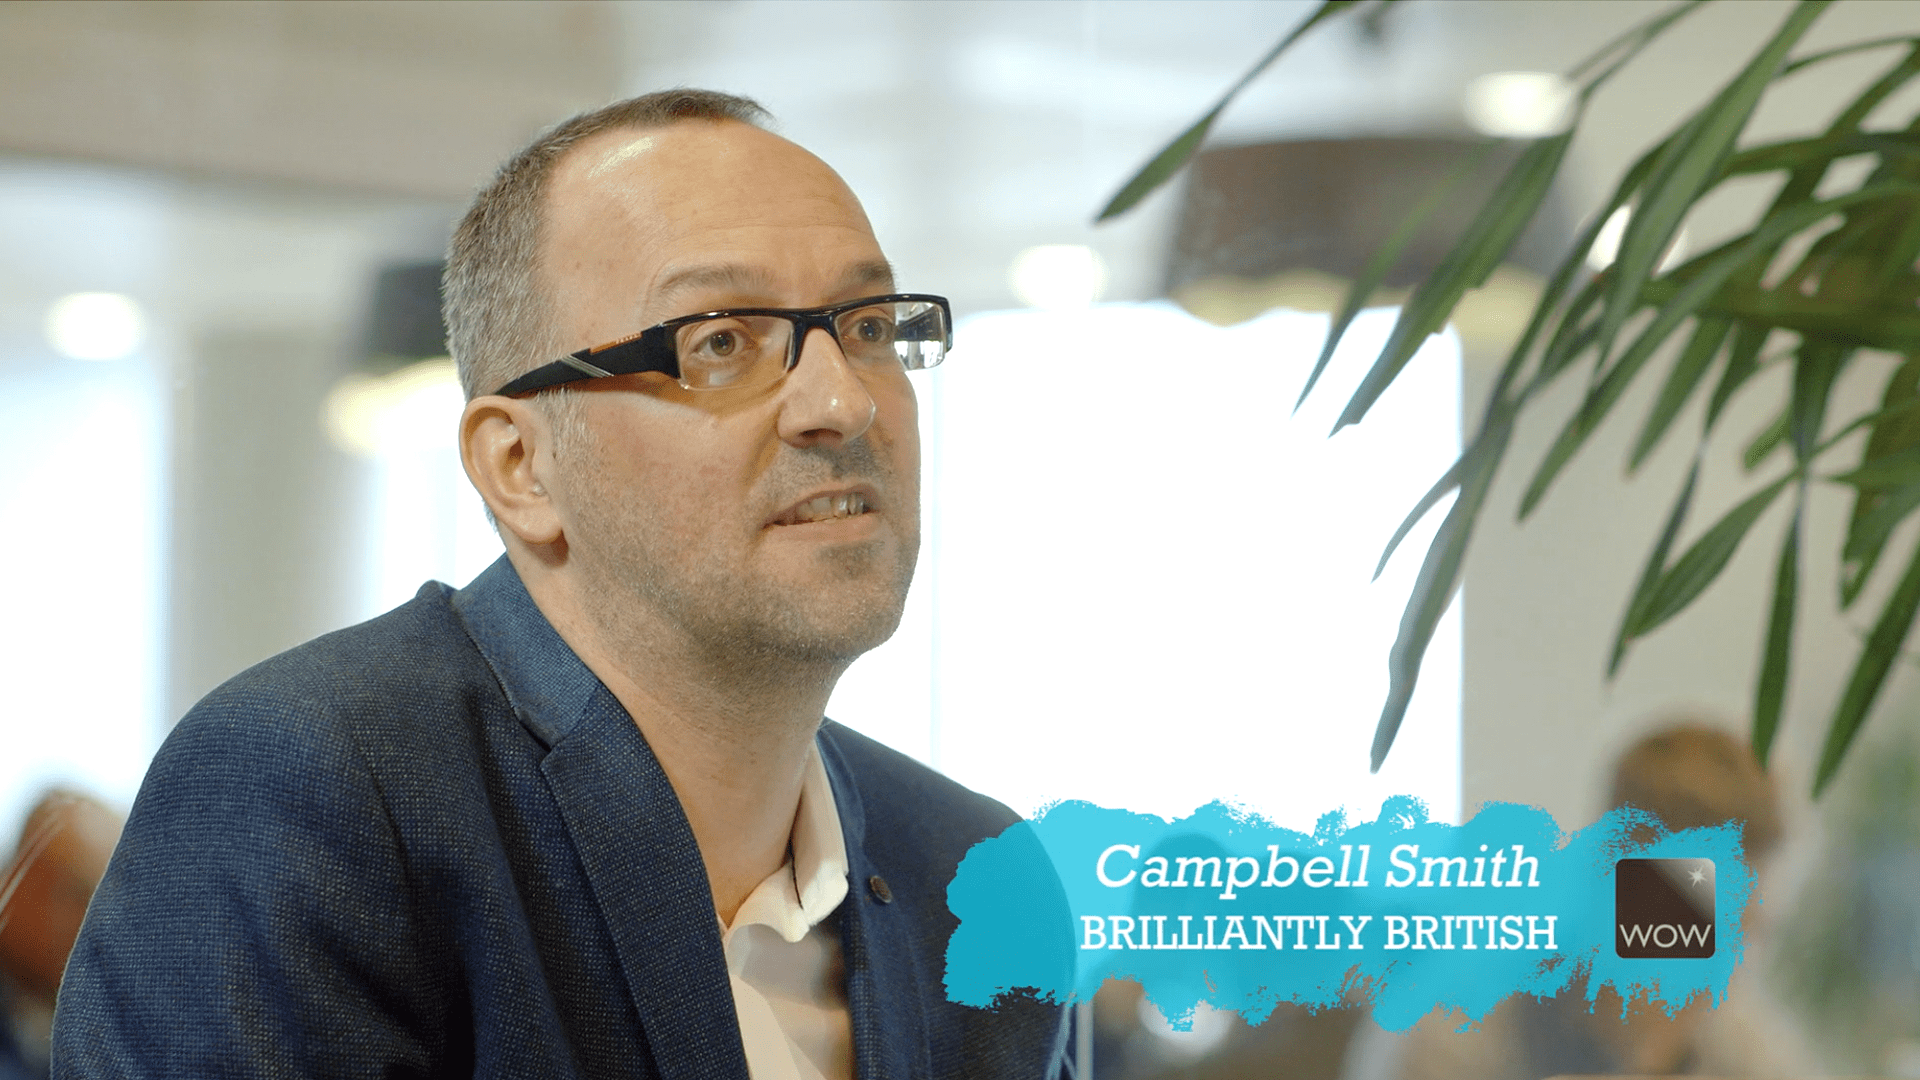 Campbell Smith, Founder of online marketplace Brilliantly British